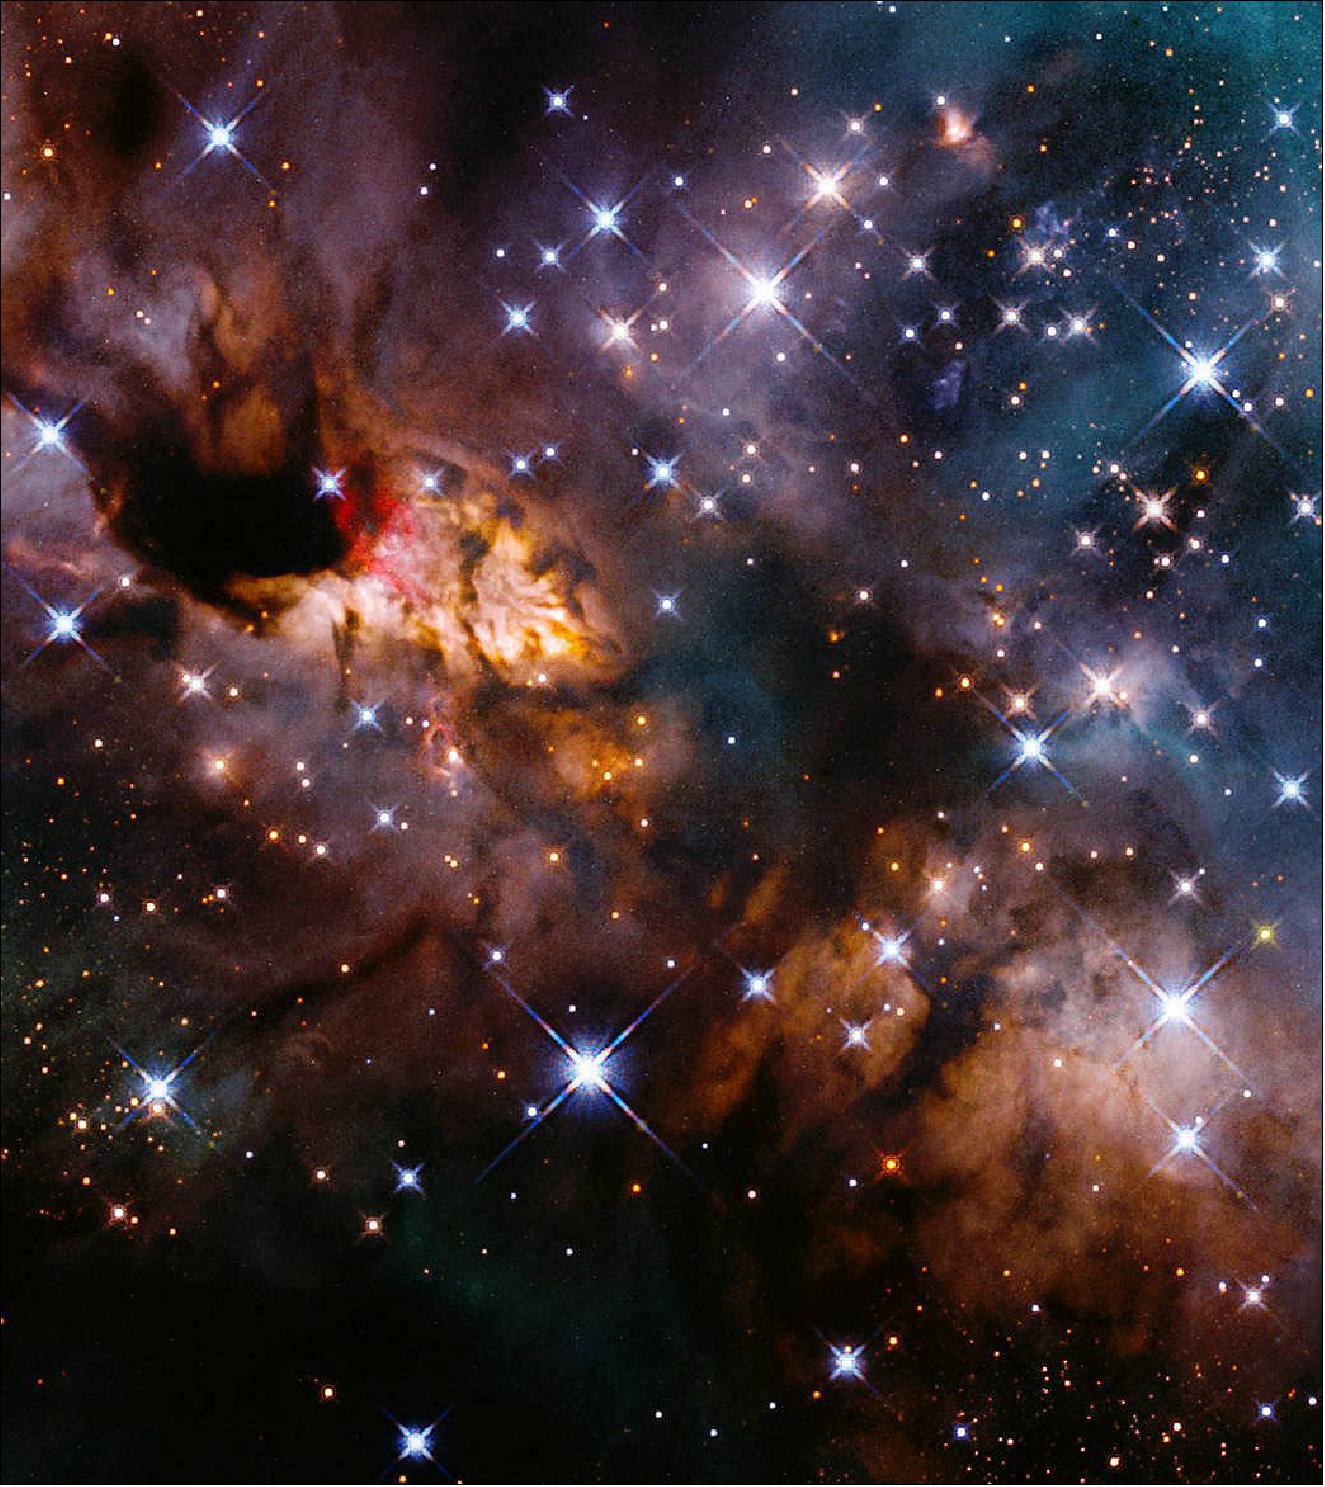 Figure 13: This Hubble Space Telescope image was captured as part of a survey of massive- and intermediate-size “protostars,” or newly forming stars. Astronomers used the infrared sensitivity of Hubble’s Wide Field Camera 3 to look for hydrogen ionized by ultraviolet light ionized by the protostars, jets from the stars, and other features [image credit: NASA, ESA, and J. Tan (Chalmers University of Technology); Processing; Gladys Kober (NASA/Catholic University of America)]